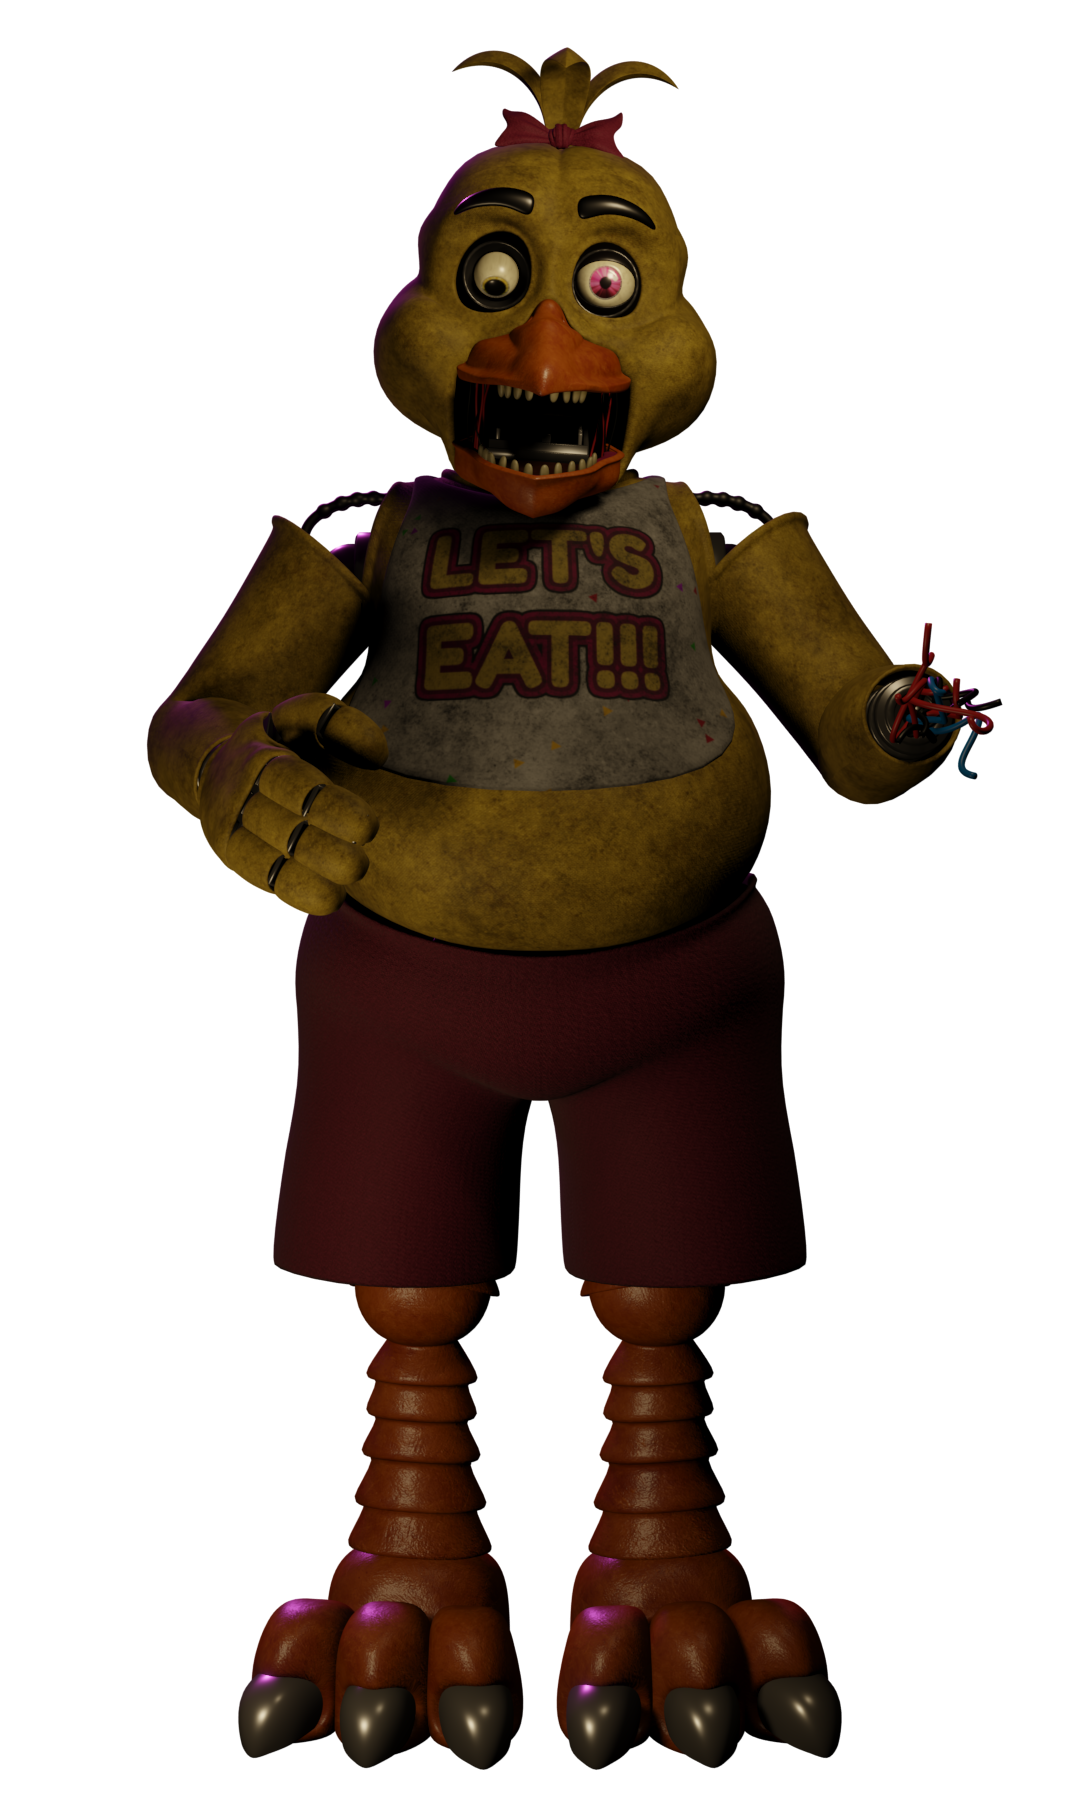 New Model Of Withered Chica by e74444444444 on DeviantArt